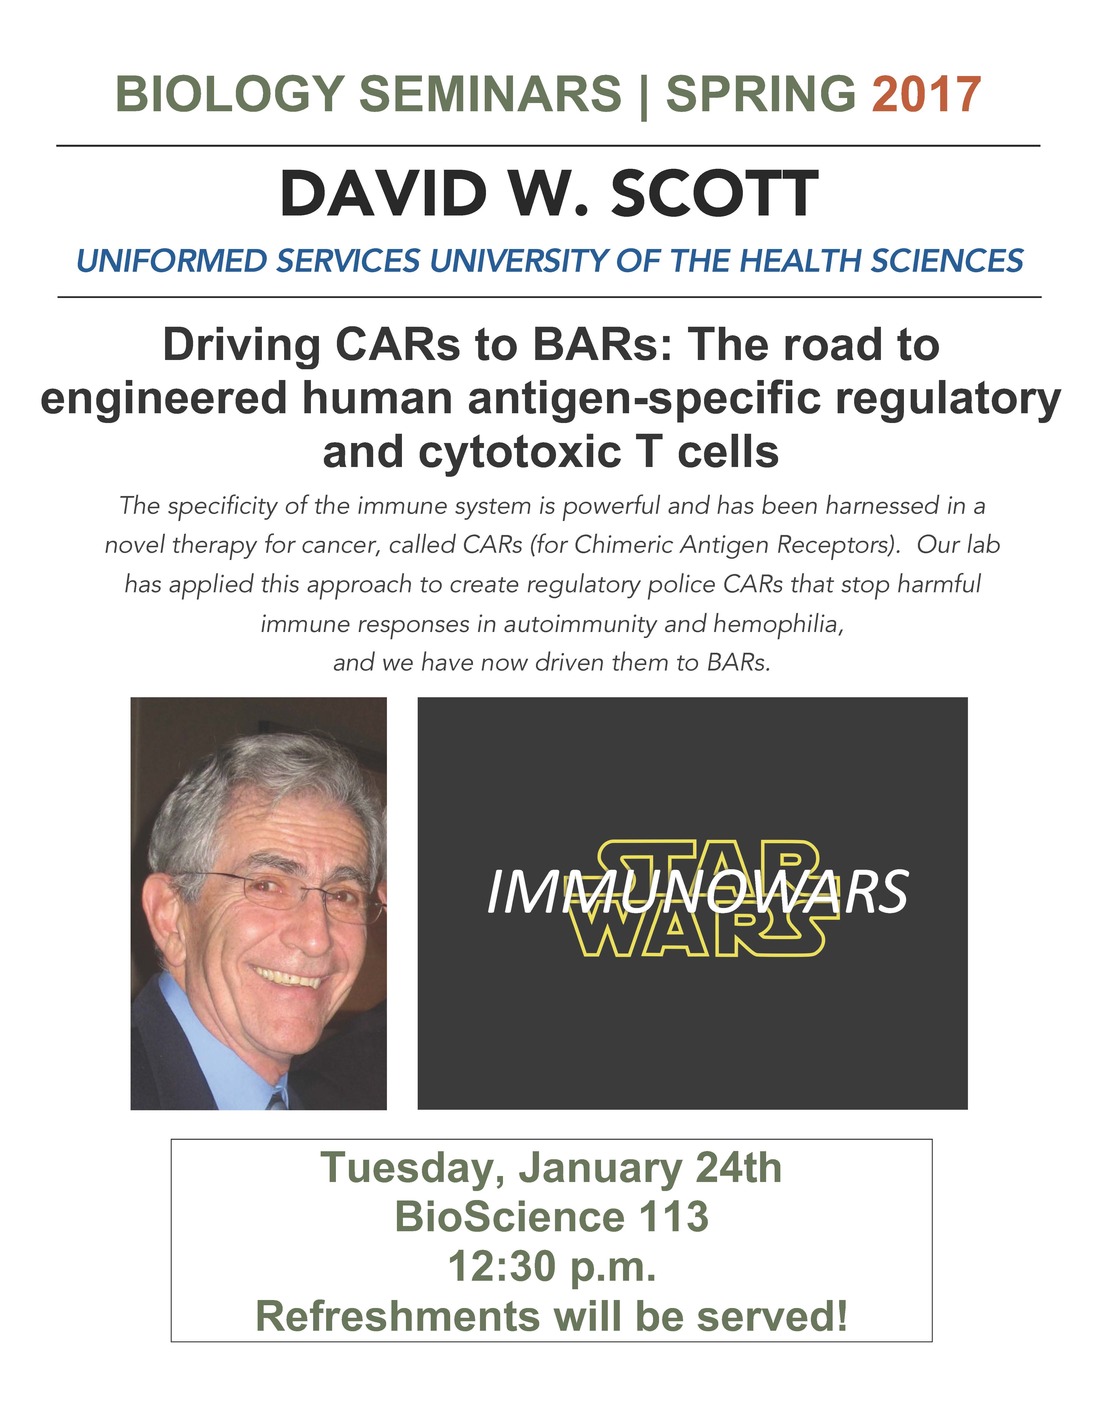 Image for David W. Scott - Driving CARs to BARs: The road to